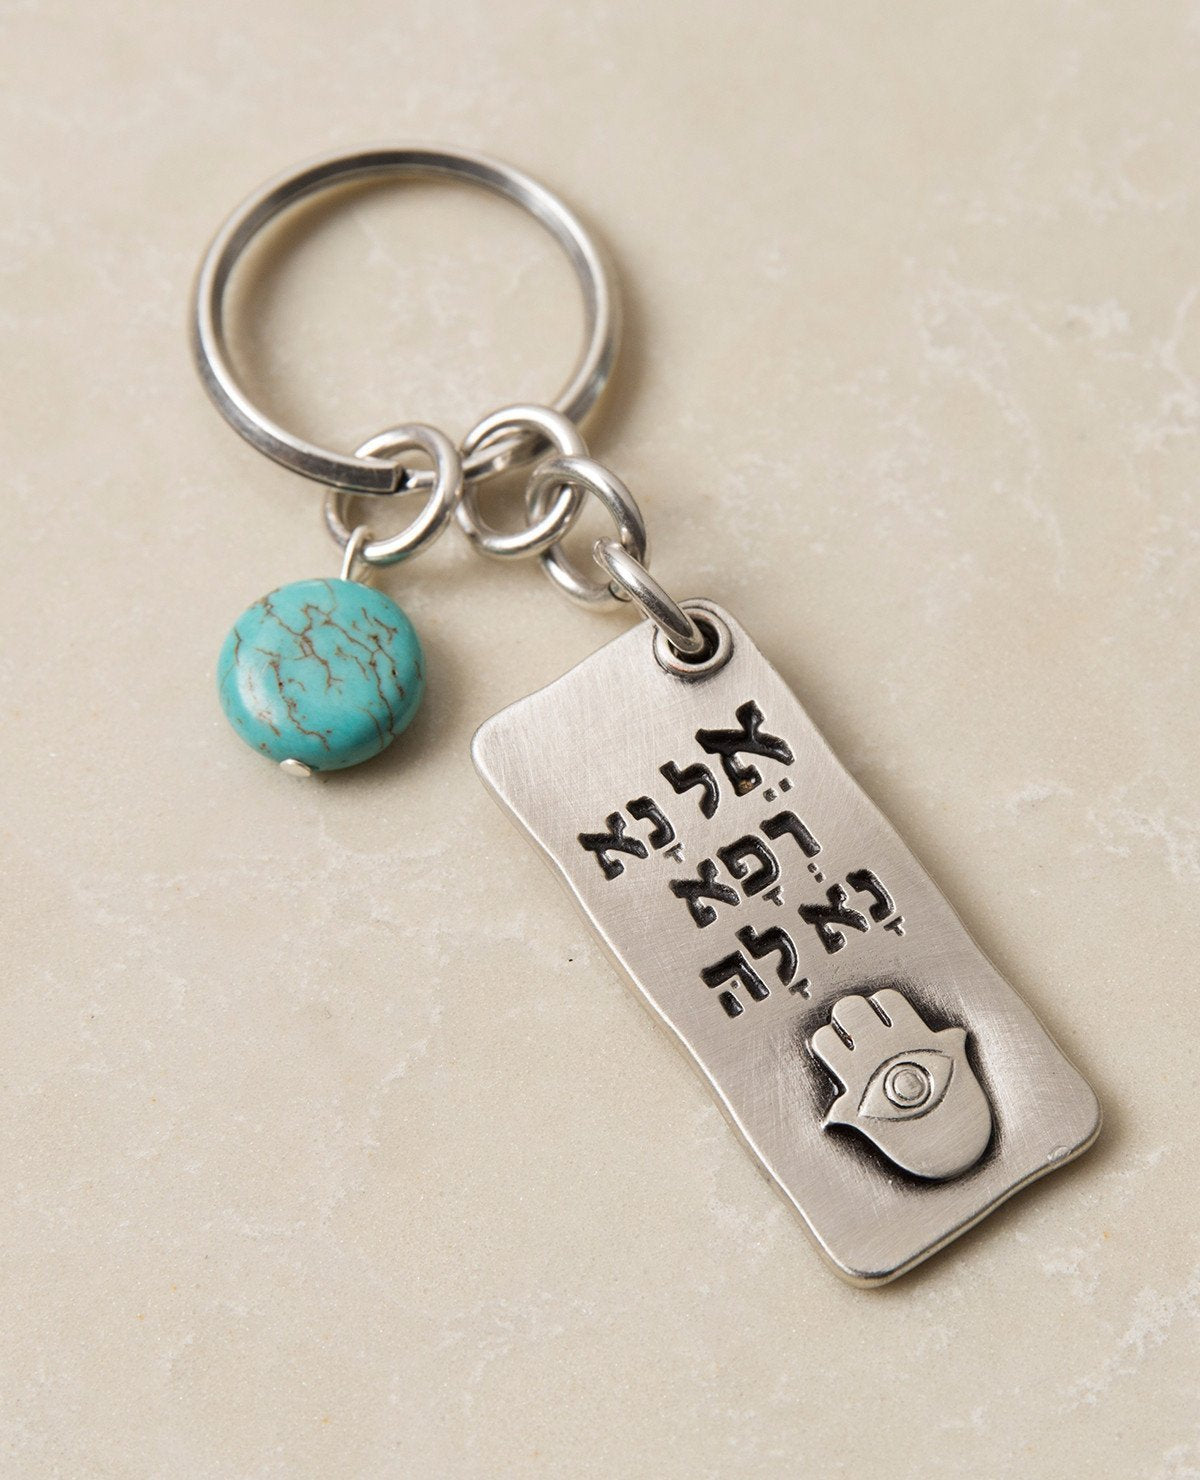 A beautiful and excitingly designed keychain, the content of which was taken from a prayer by Moses for the health of his sister, and it is in fact a prayer for good health. Shaped as a rectangular plate that has the sentence "Please, God, heal her" written in Hebrew on one side, and underneath an embossed image of a Hamsa with an eye. The other side contains blessings, in both English and Hebrew, for quick recovery, good health, and longevity. Next to the plate hangs a pretty turquoise stone. The keychain 